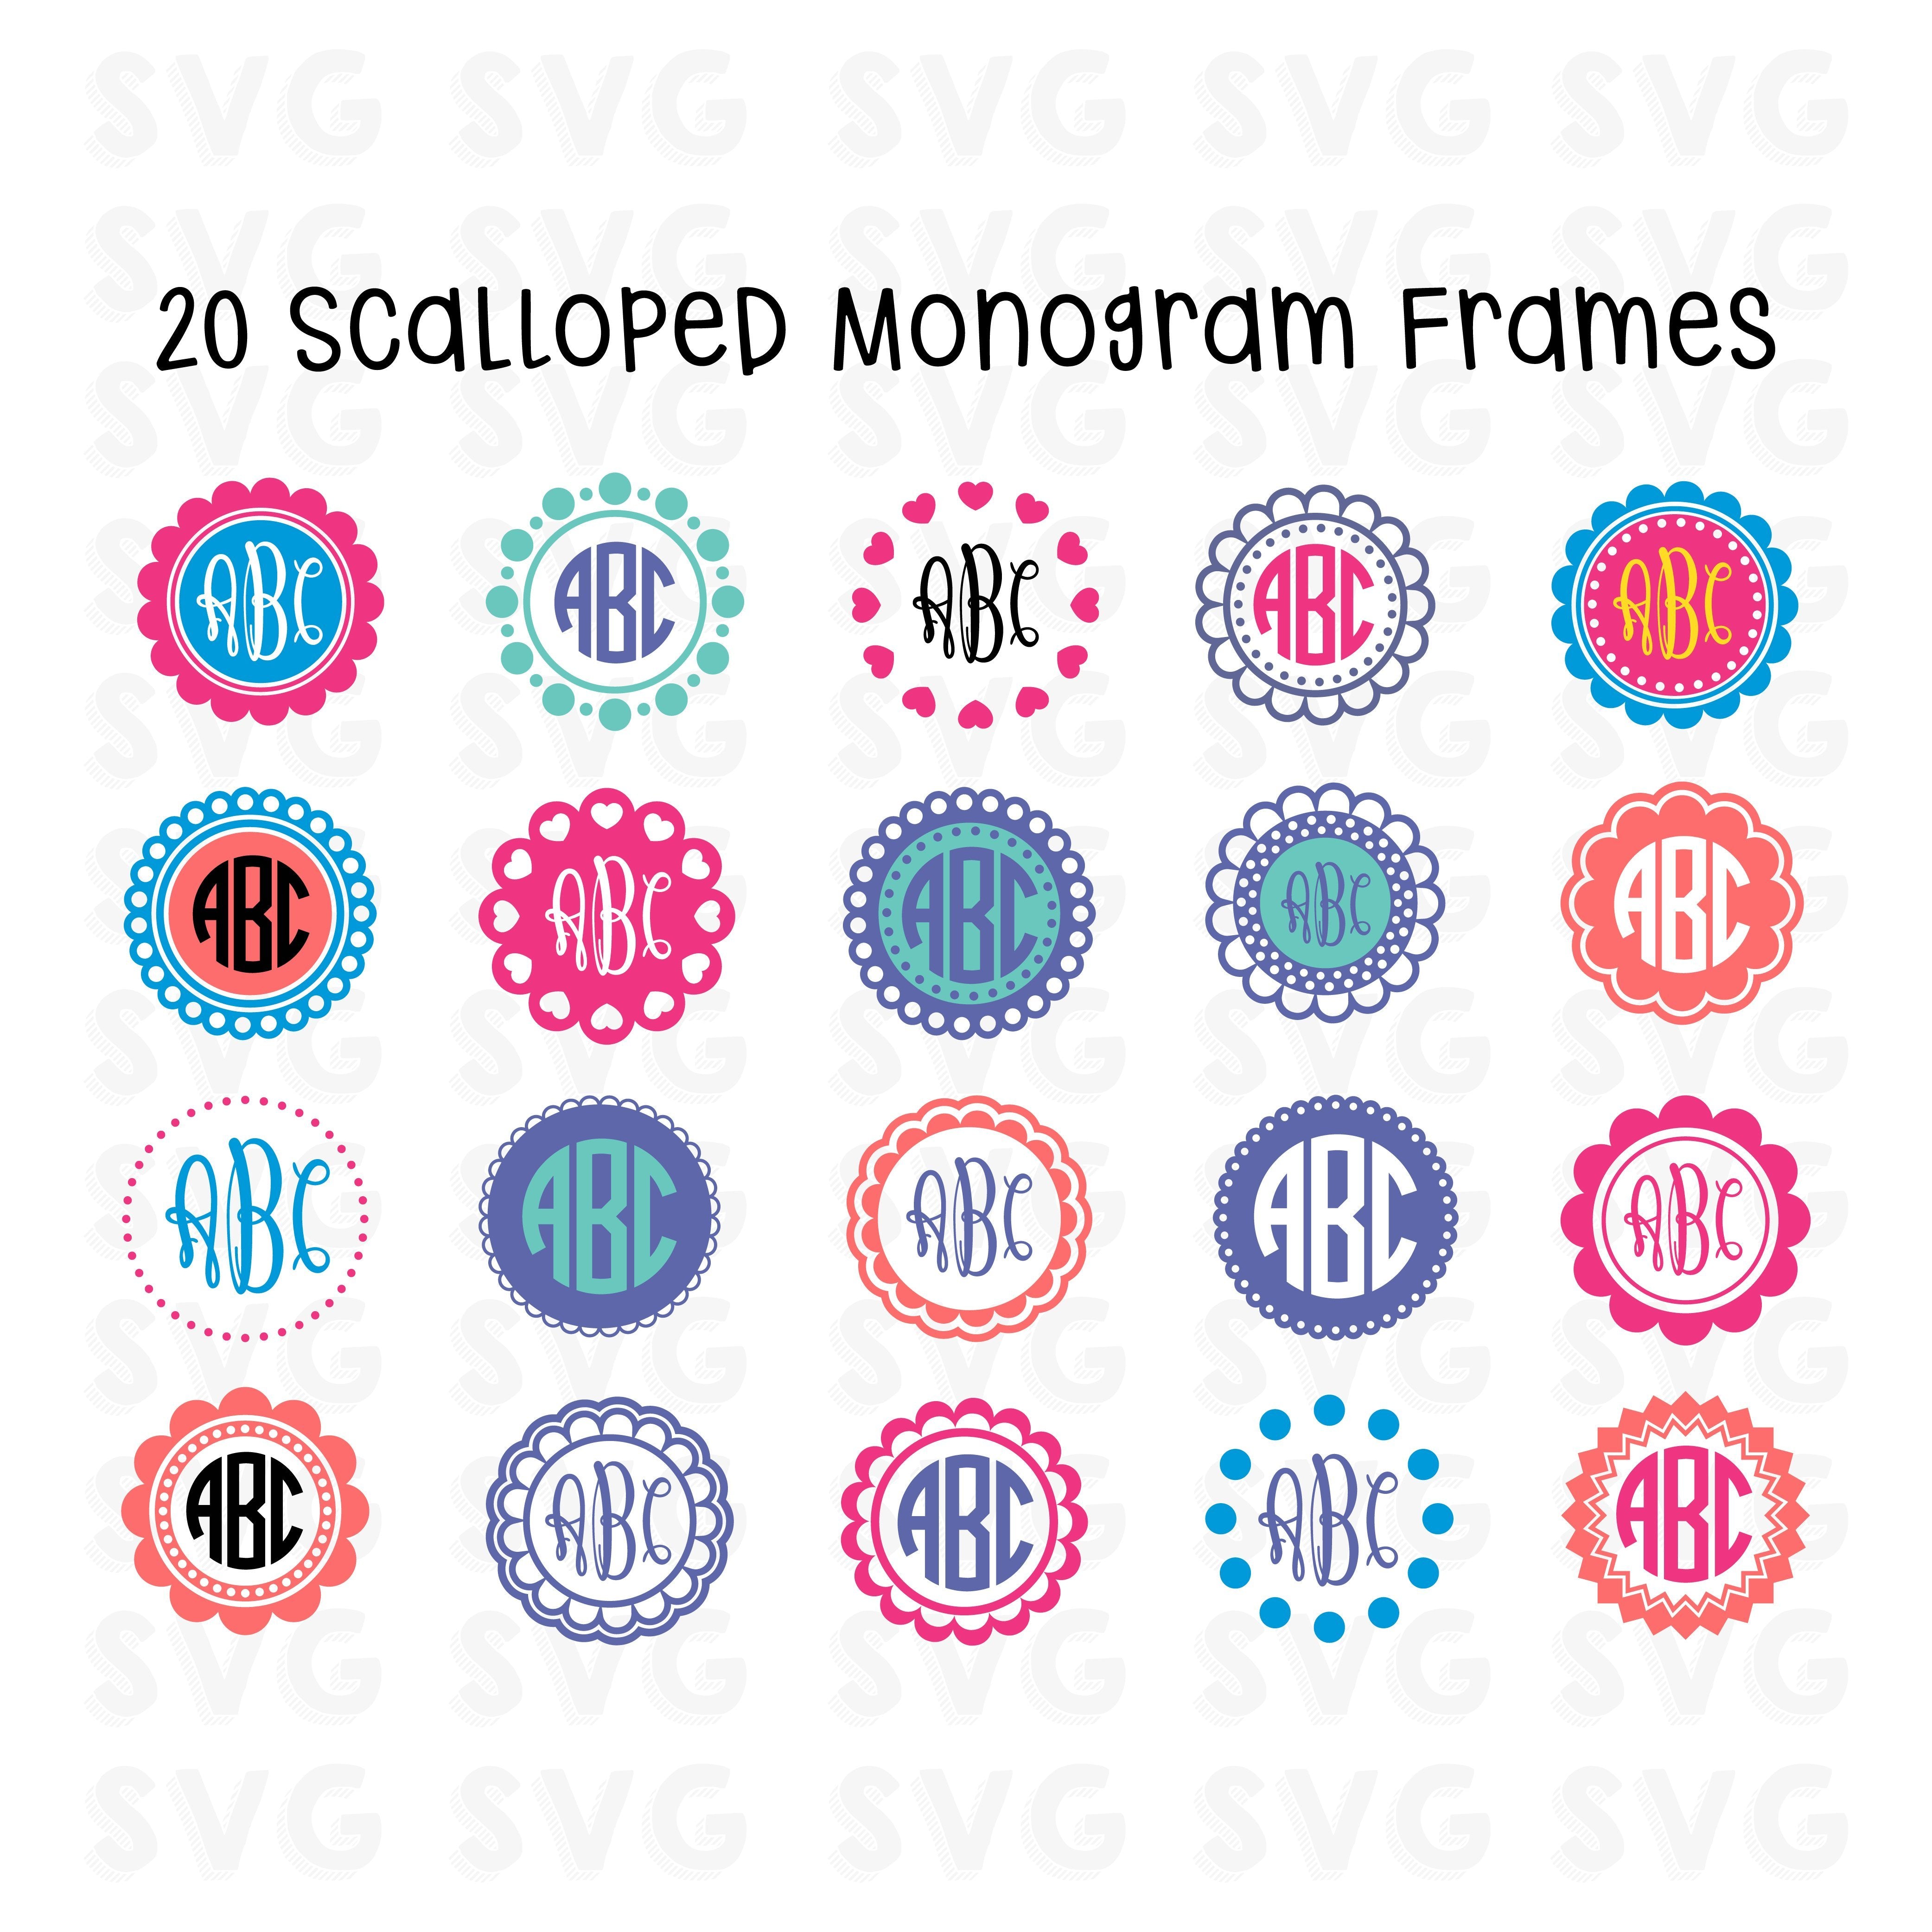 Download More Wedding Svg Cut Files Screen Printing Monogram Frames For Vinyl Cutters Silhouette Die Cut Machines Craft Supplies Tools Collage Sheets Delage Com Br